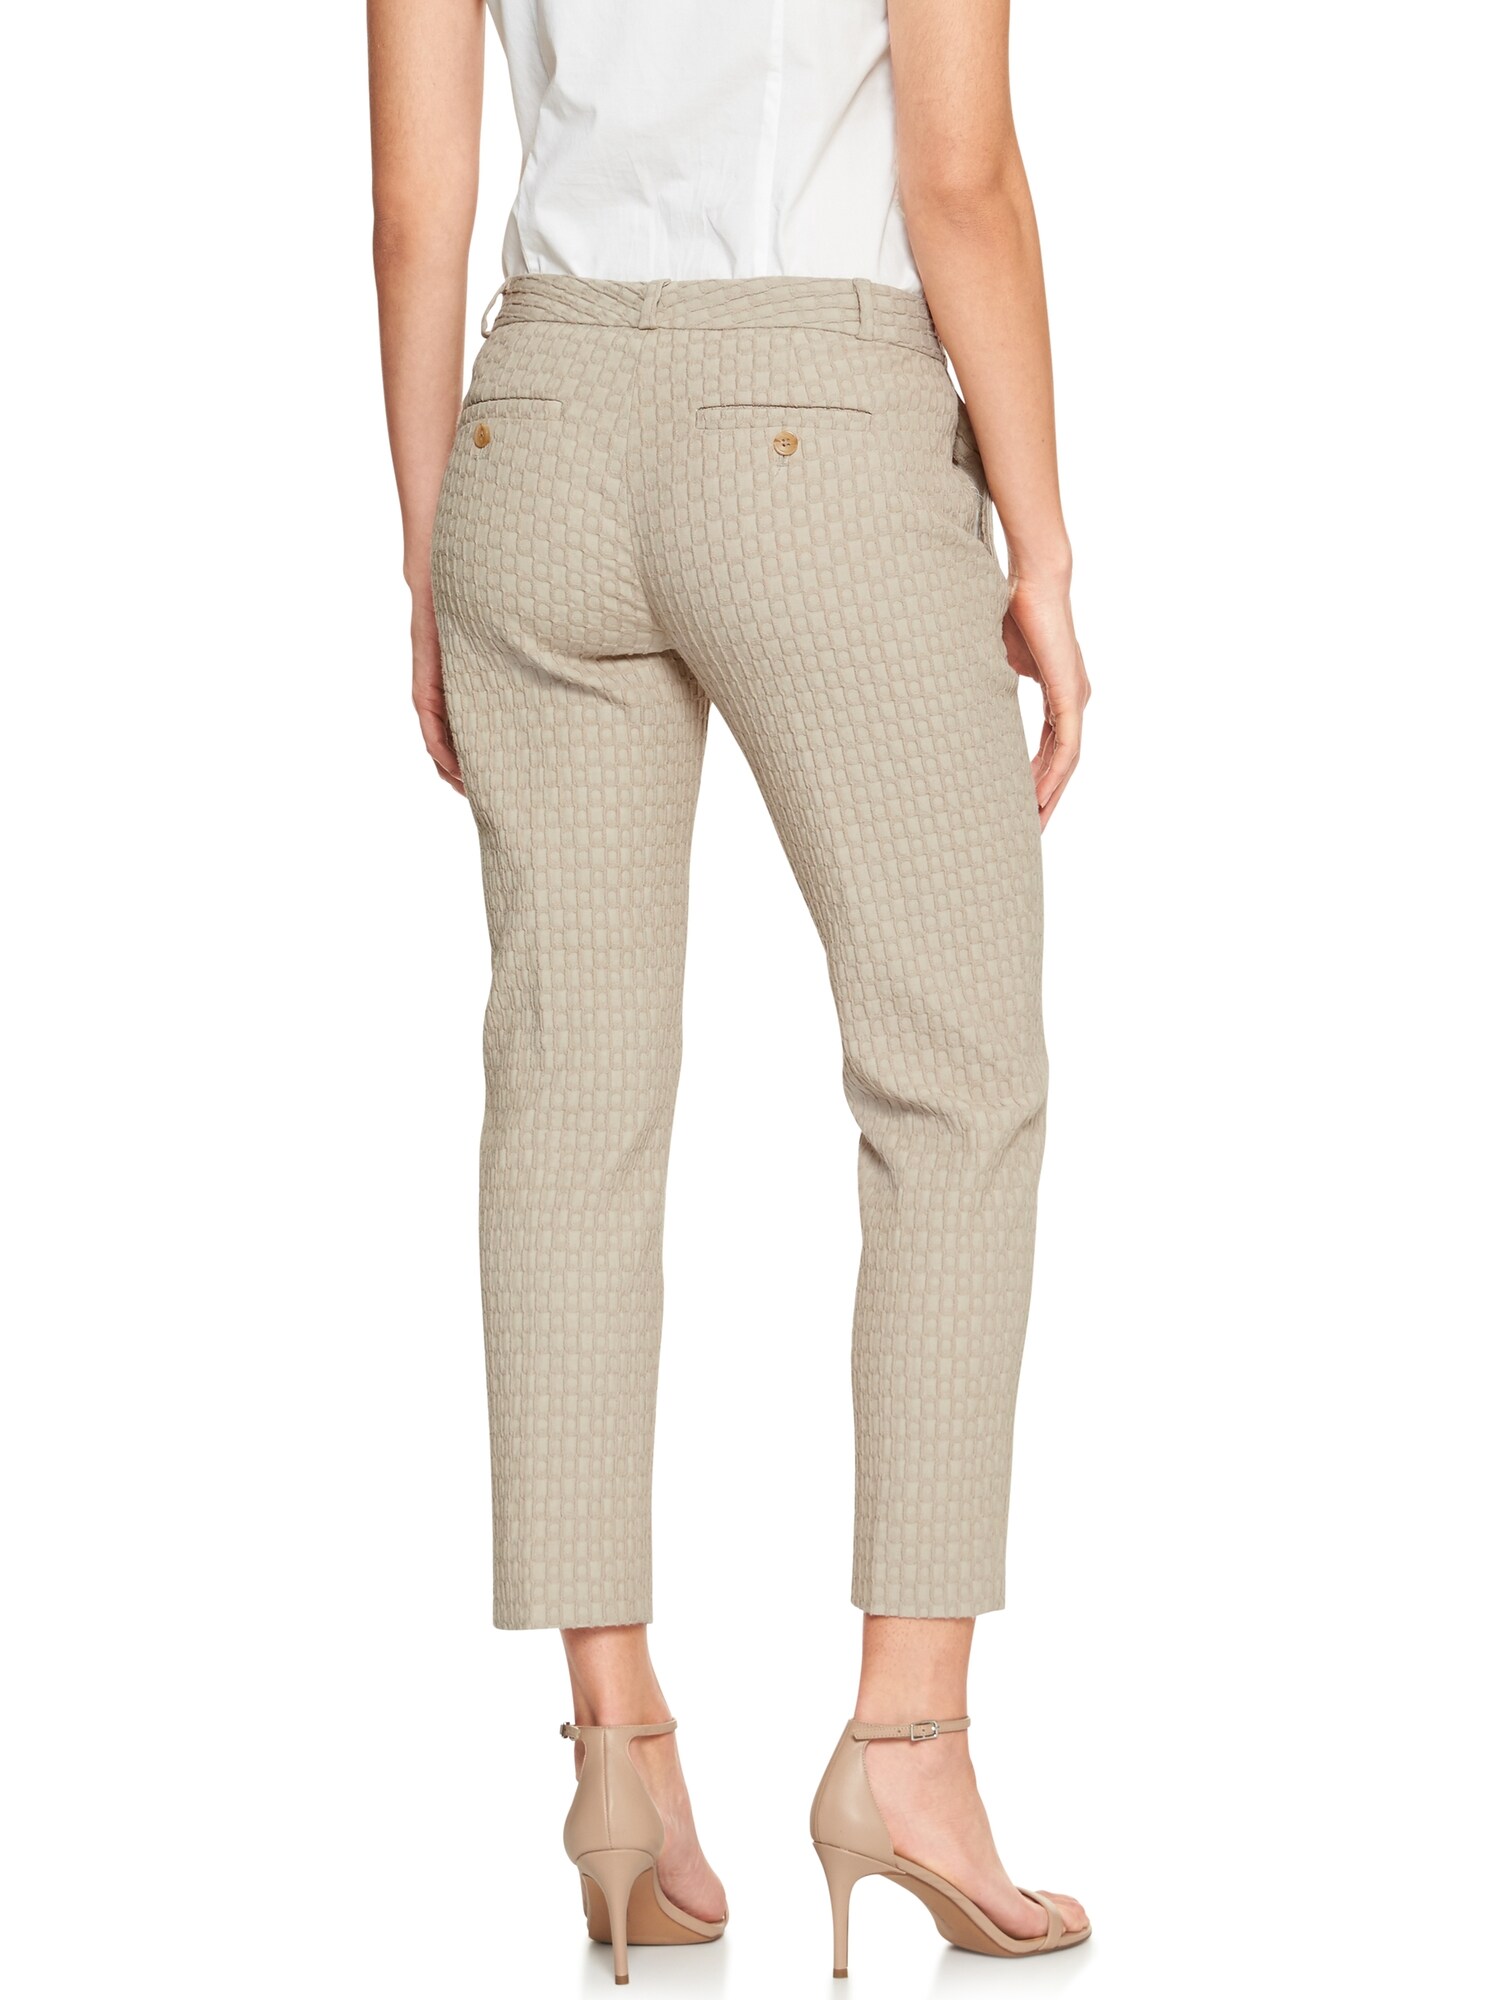 Avery Circle Jacquard Tailored Ankle Pant